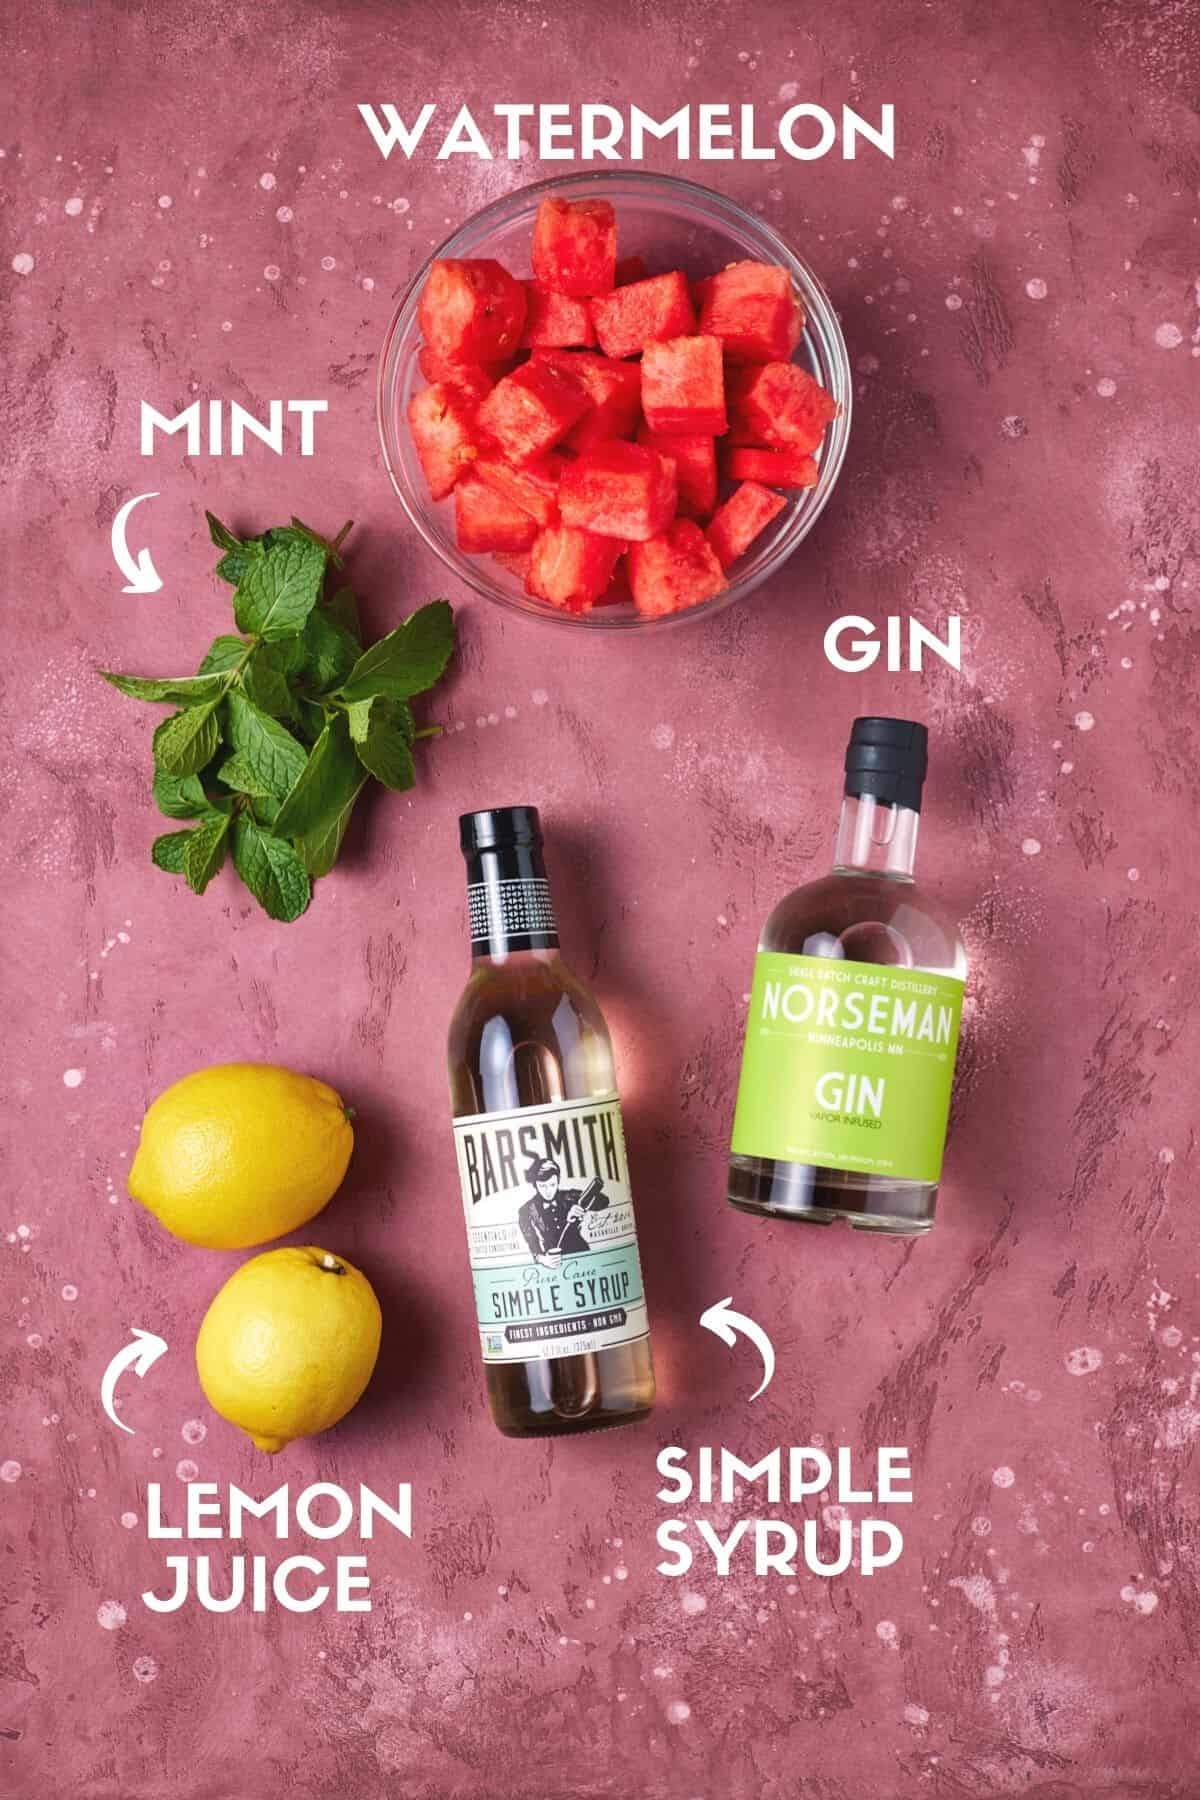 Lemons, simple syrup, mint, gin and fresh watermelon to make gin punch.